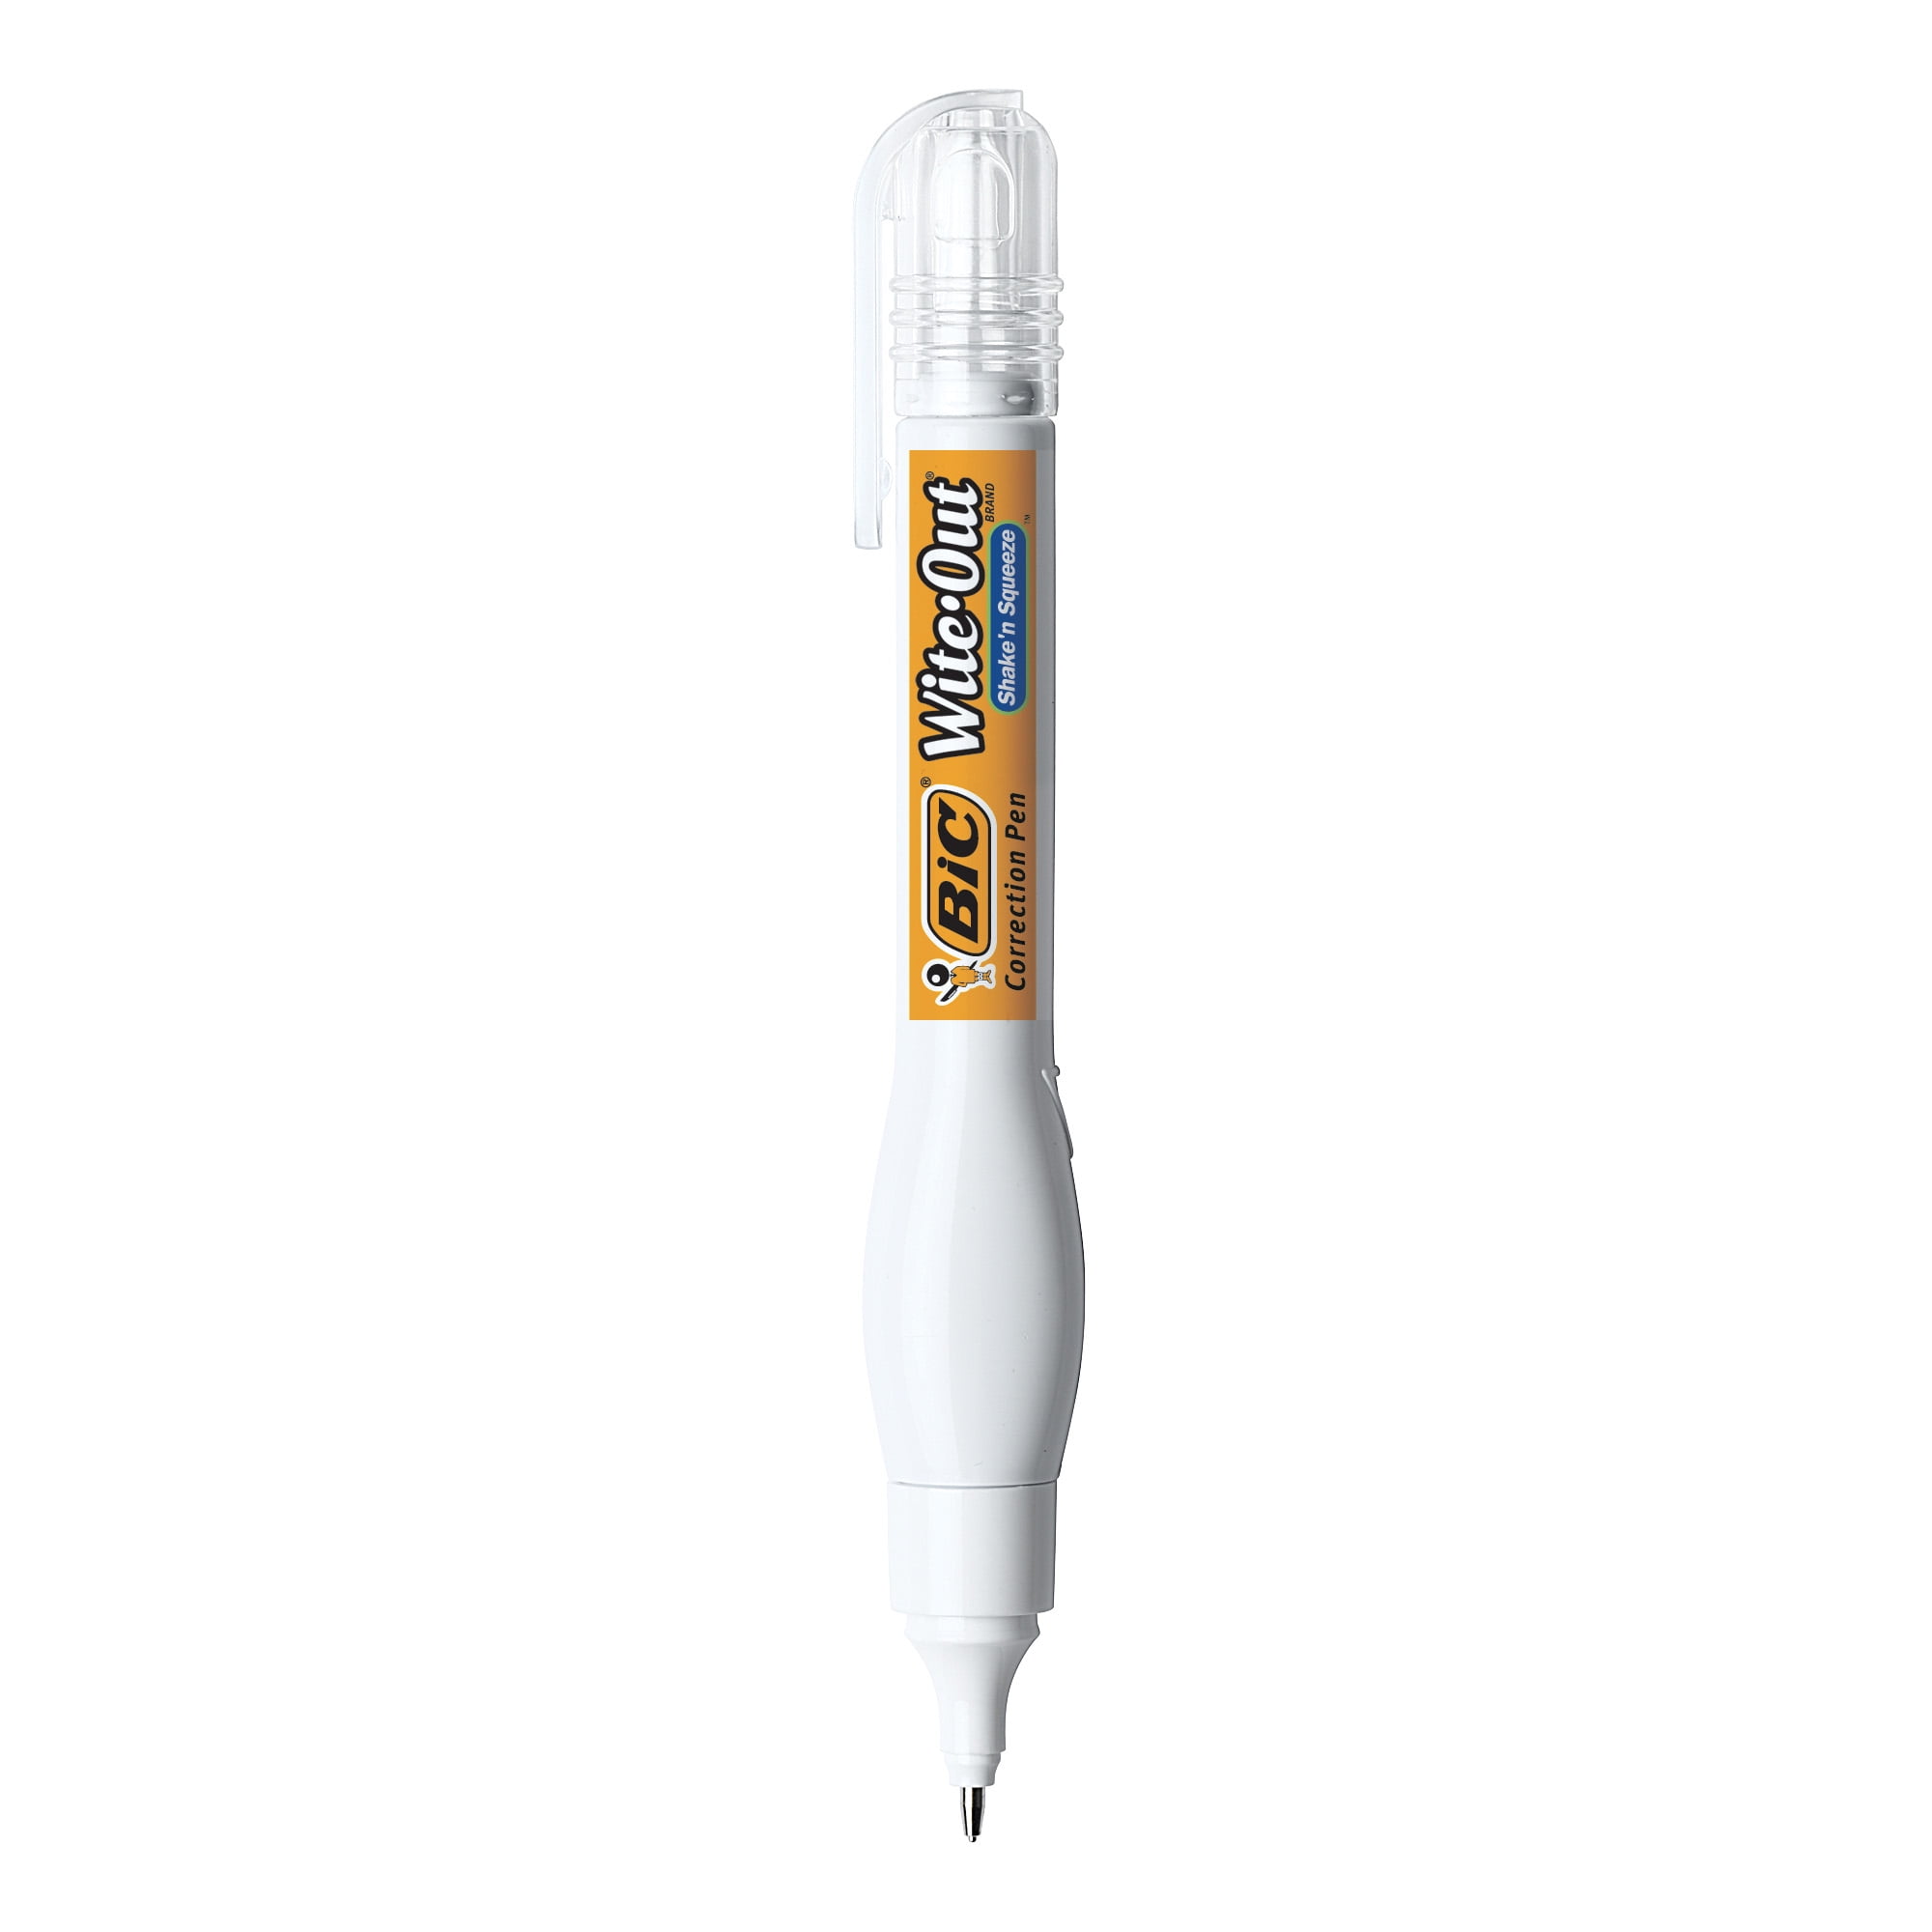 10mL touch-up pen for Ikea BILLY white - Q-Pen Original © since 2012